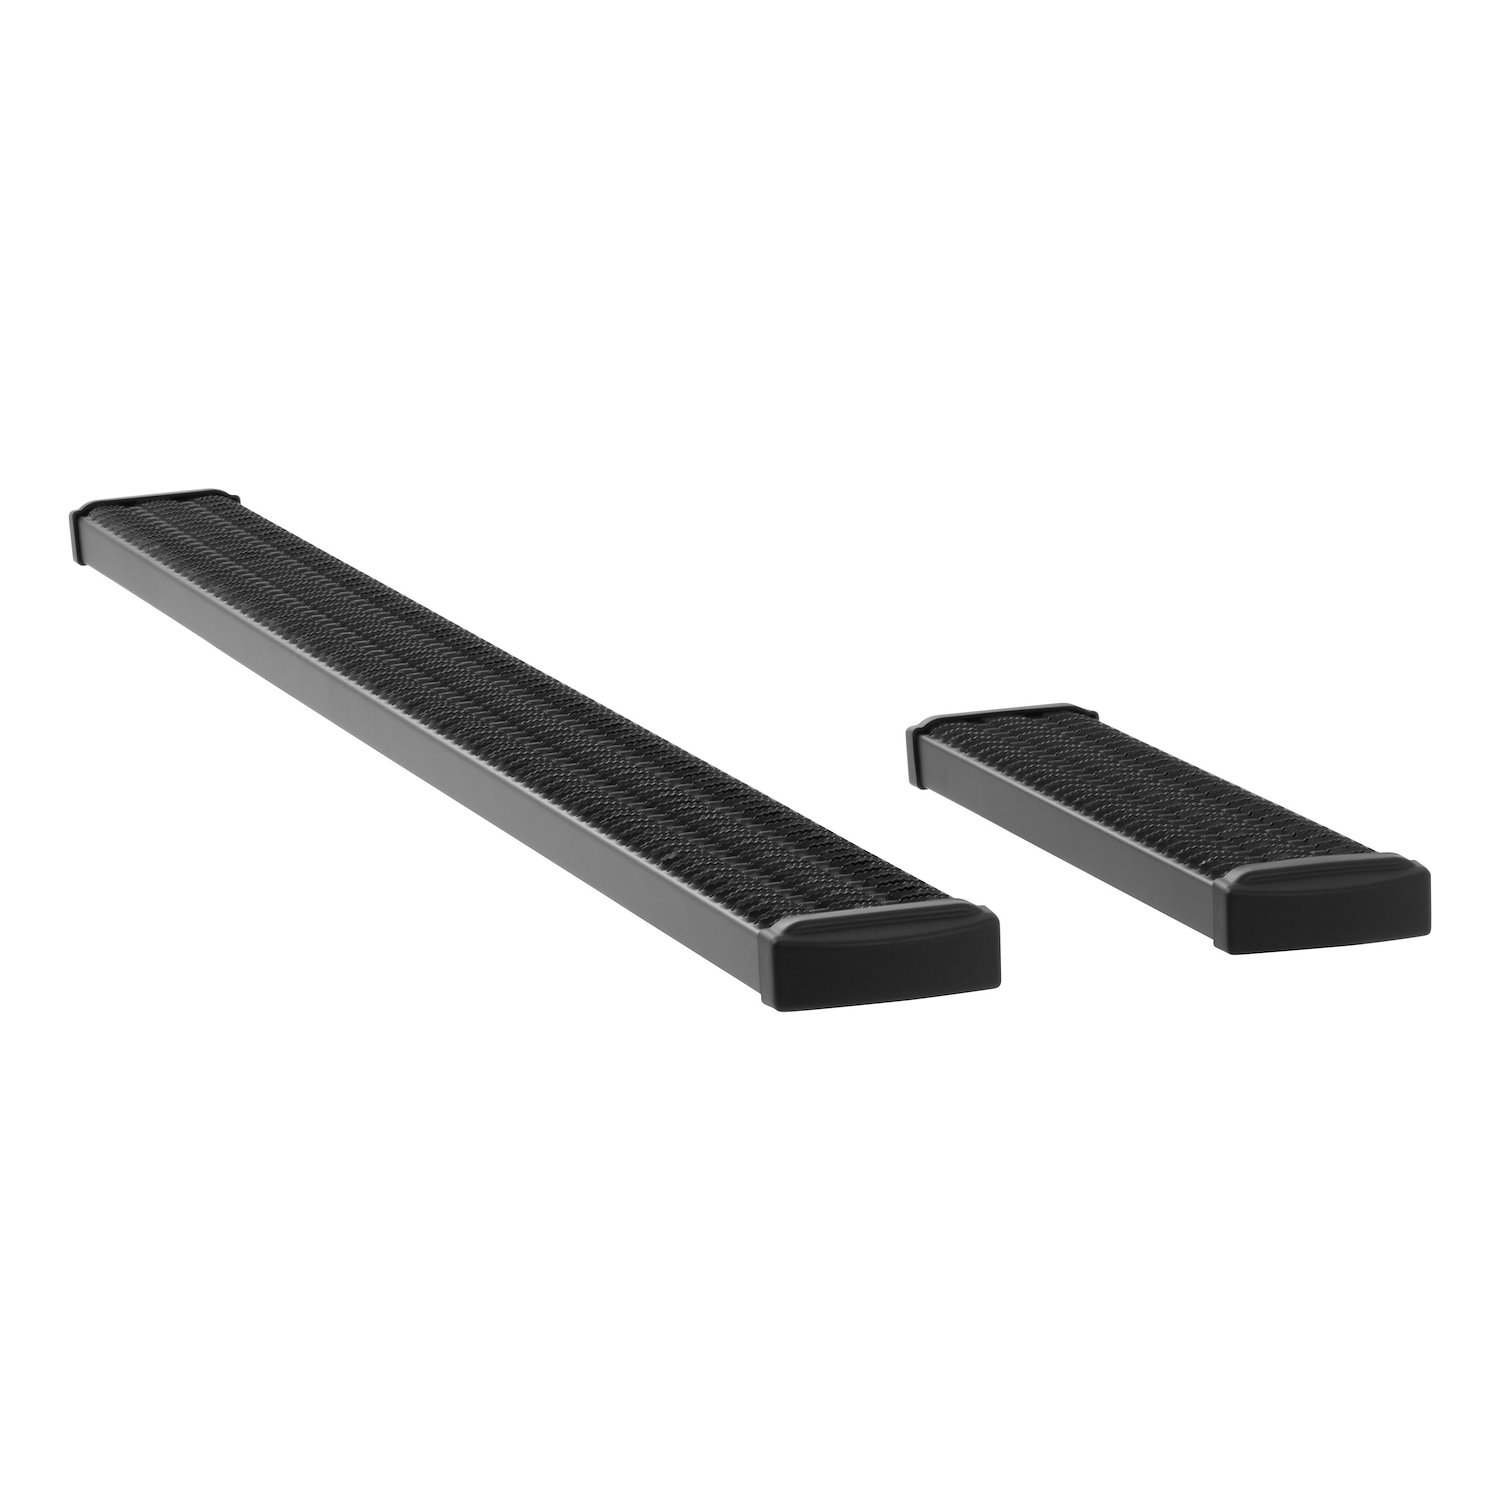 415100-401164 Grip Step 7 in. x 36 in., 100 in. Black Aluminum Running Boards Fits Select Nissan NV Vans